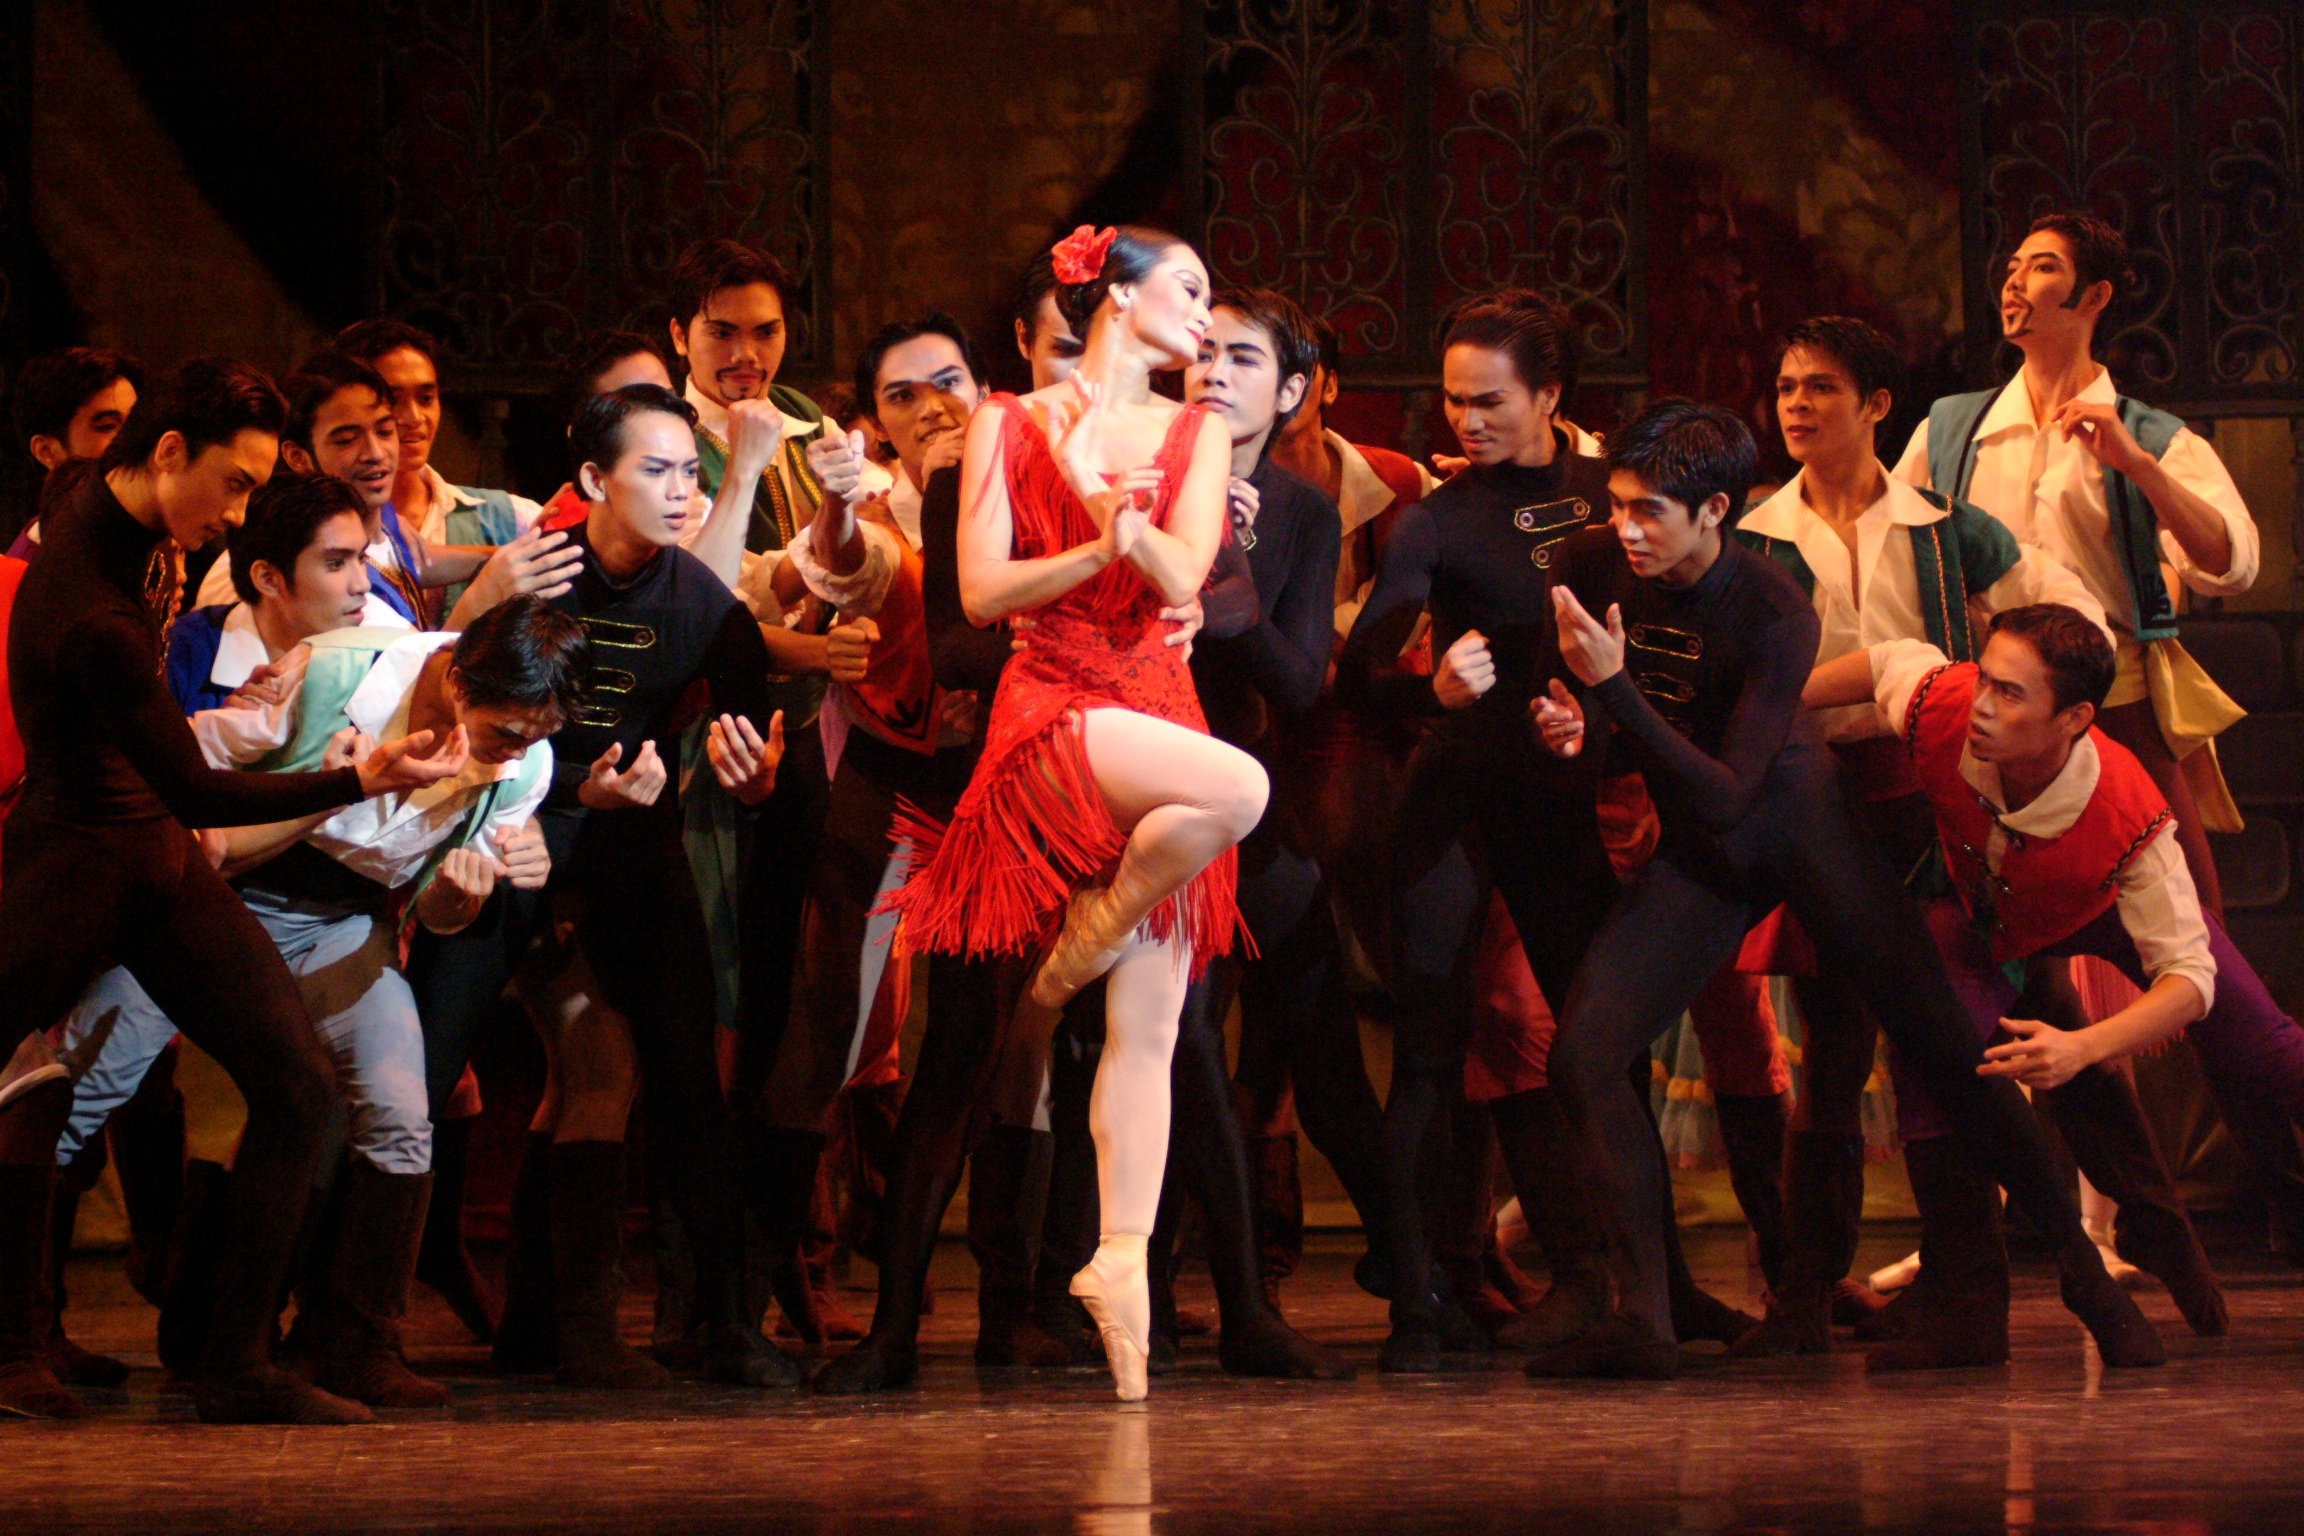    The seductress in her element, 2005. Although there are older versions of  Carmen , the one choreographed by Eric V. Cruz stands out for me primarily because it is passionate and risqué in its staging, and the music from the opera is simply mesmer